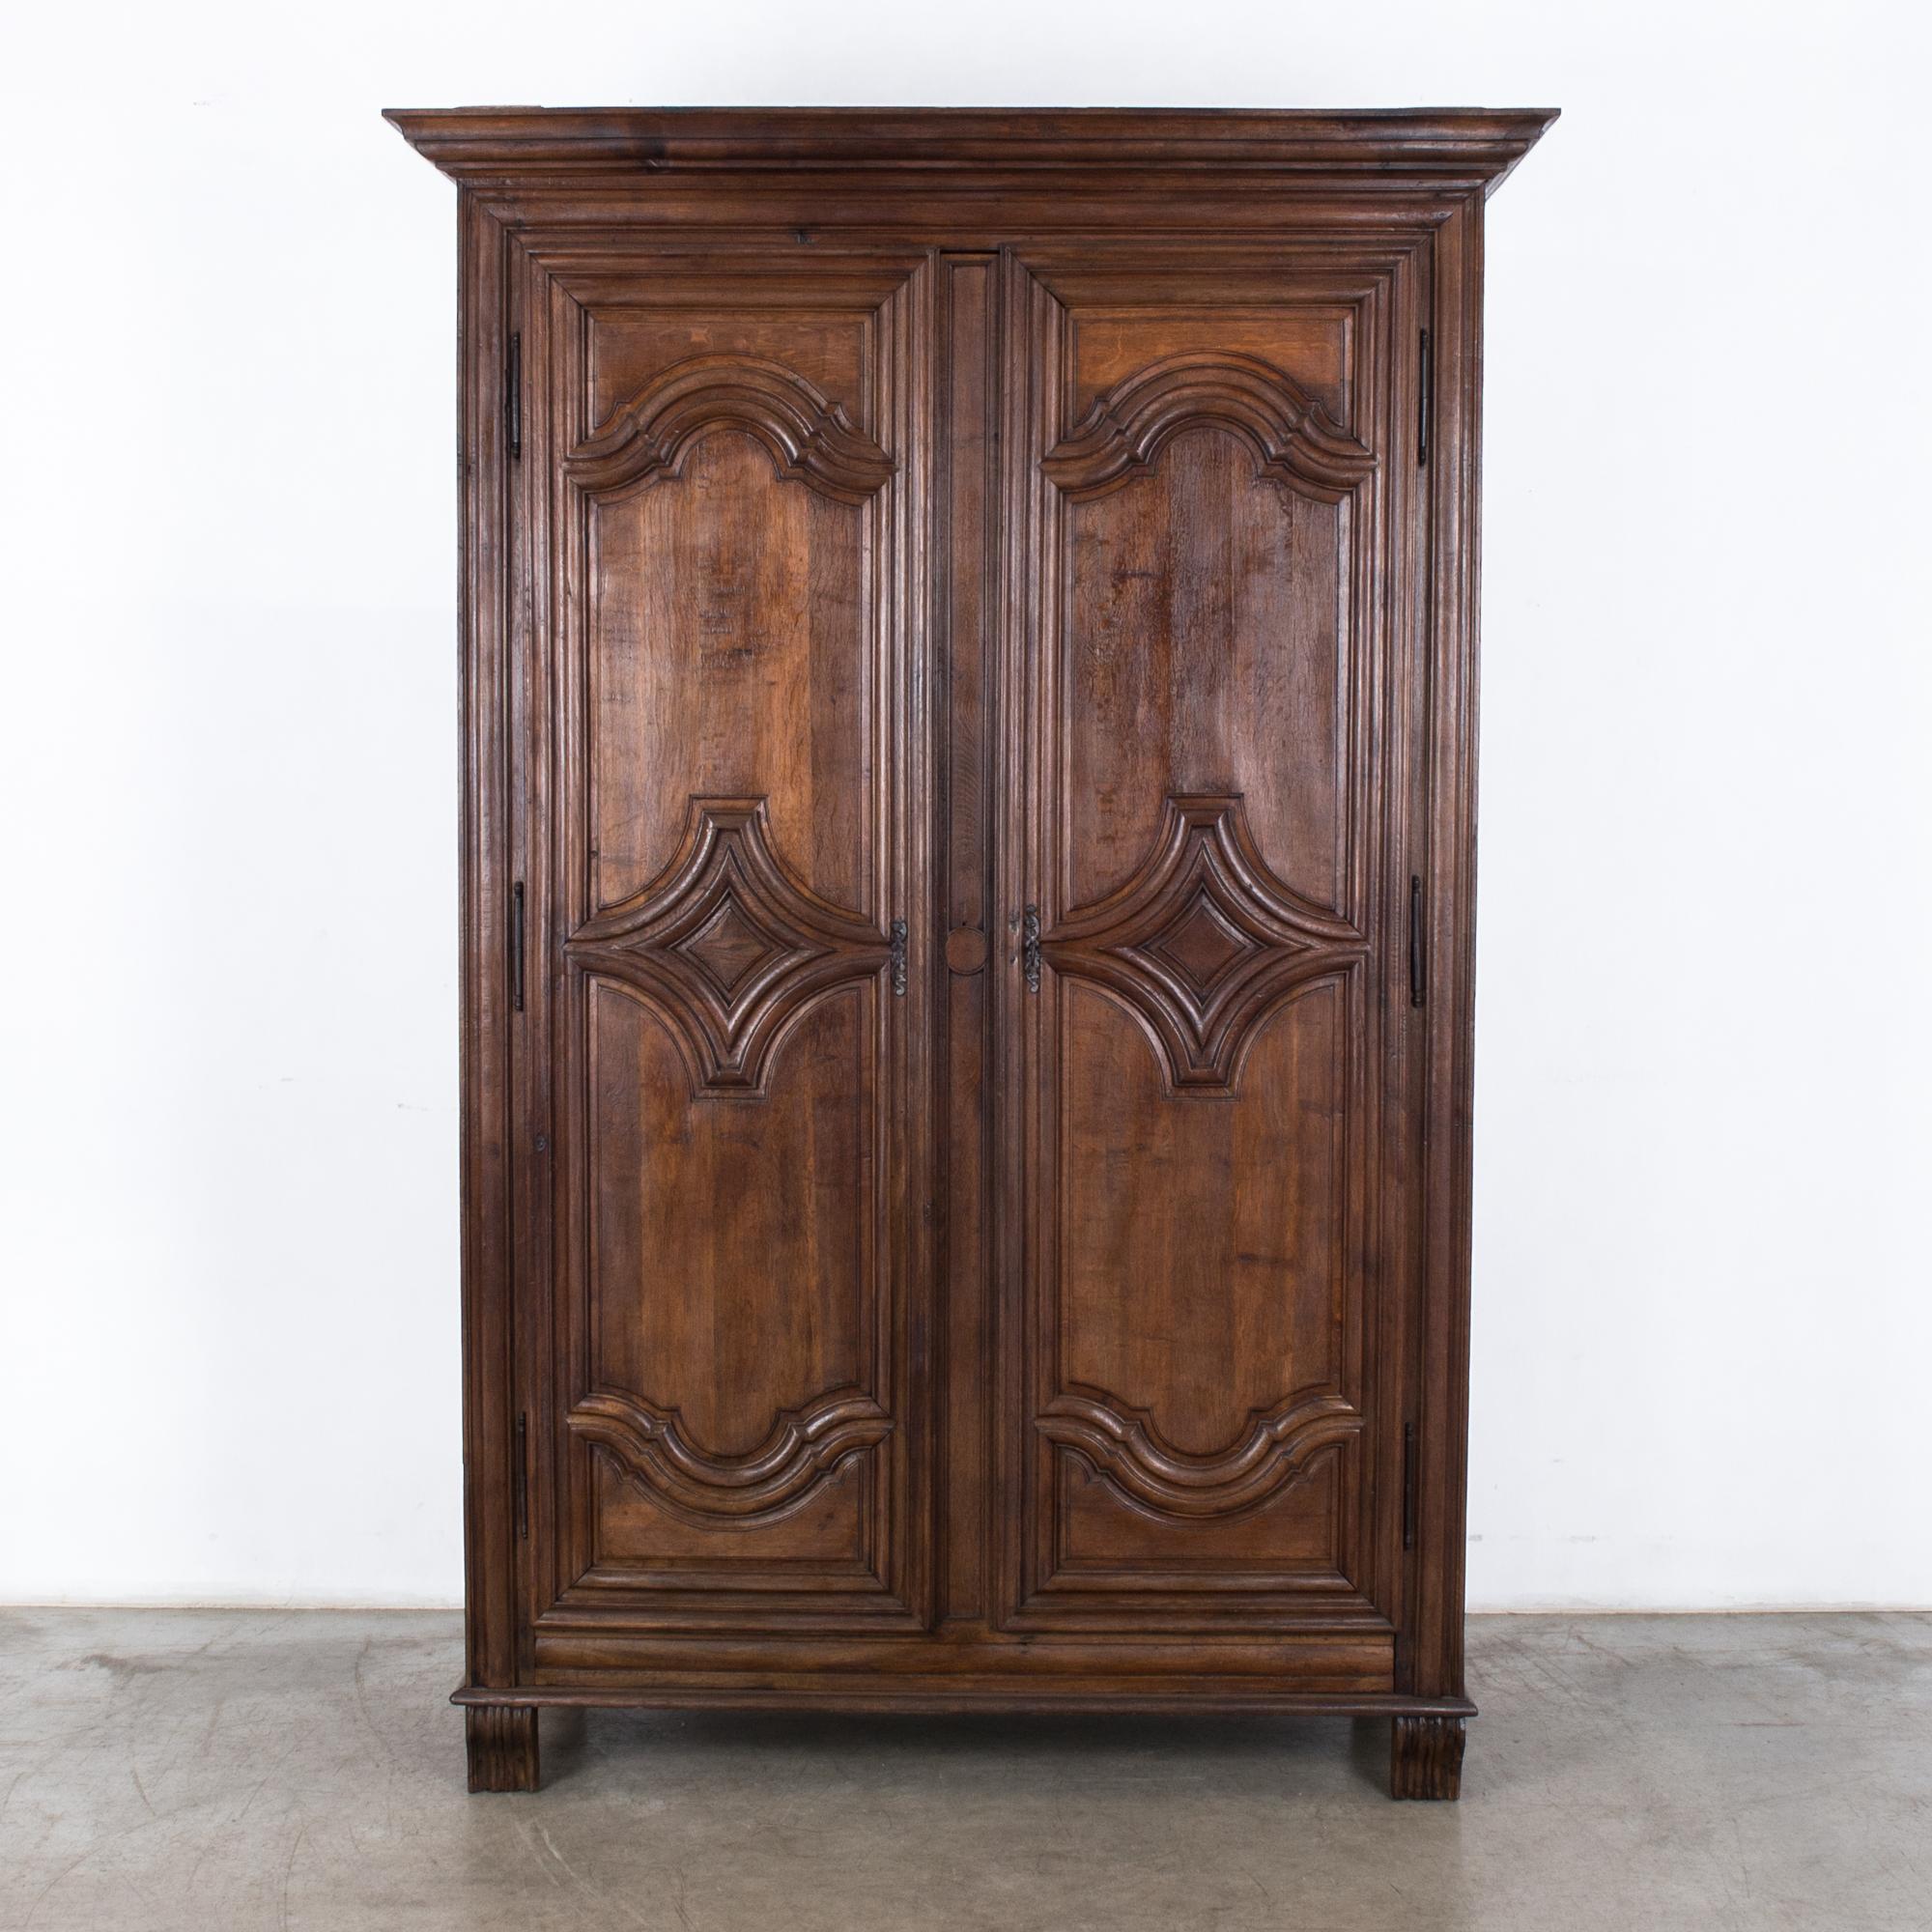 A wooden armoire from France, circa 1800. Tall in stature, with two doors that open onto a unique and practical interior arrangement: three interior shelves and a pair of pull out drawers with golden handles. The tone of the oak is warm and rosy,